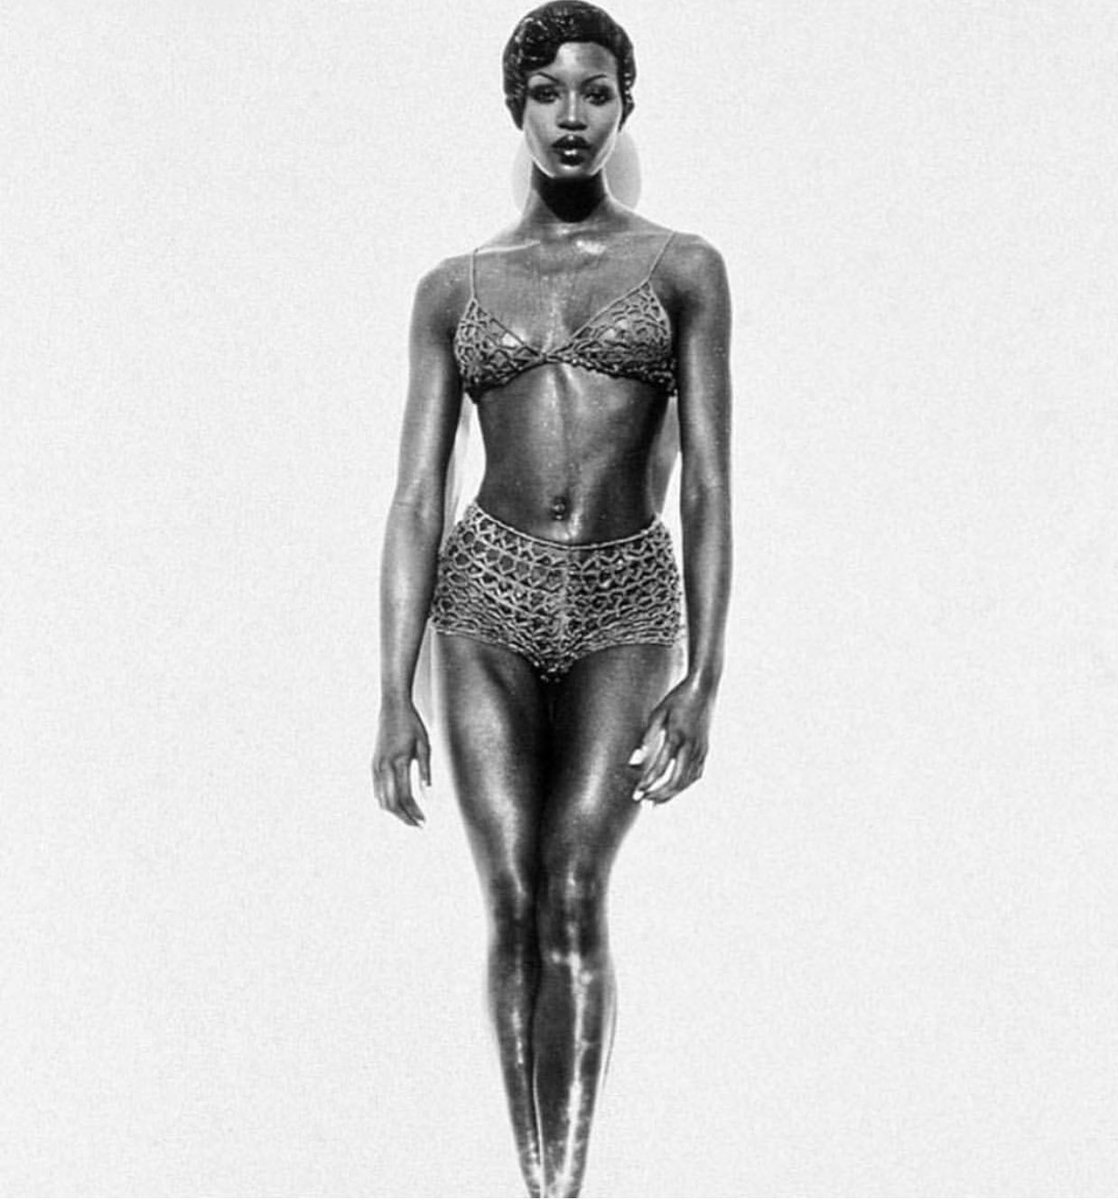 #HERBRITTSDAY @herbritts!!! WILL NEVER FORGET YOU. ONE OF THE MOST DRIVEN YET PEACEFUL SOULS I EVER MET ♥️♥️???????? https://t.co/6DtoWzTAXI